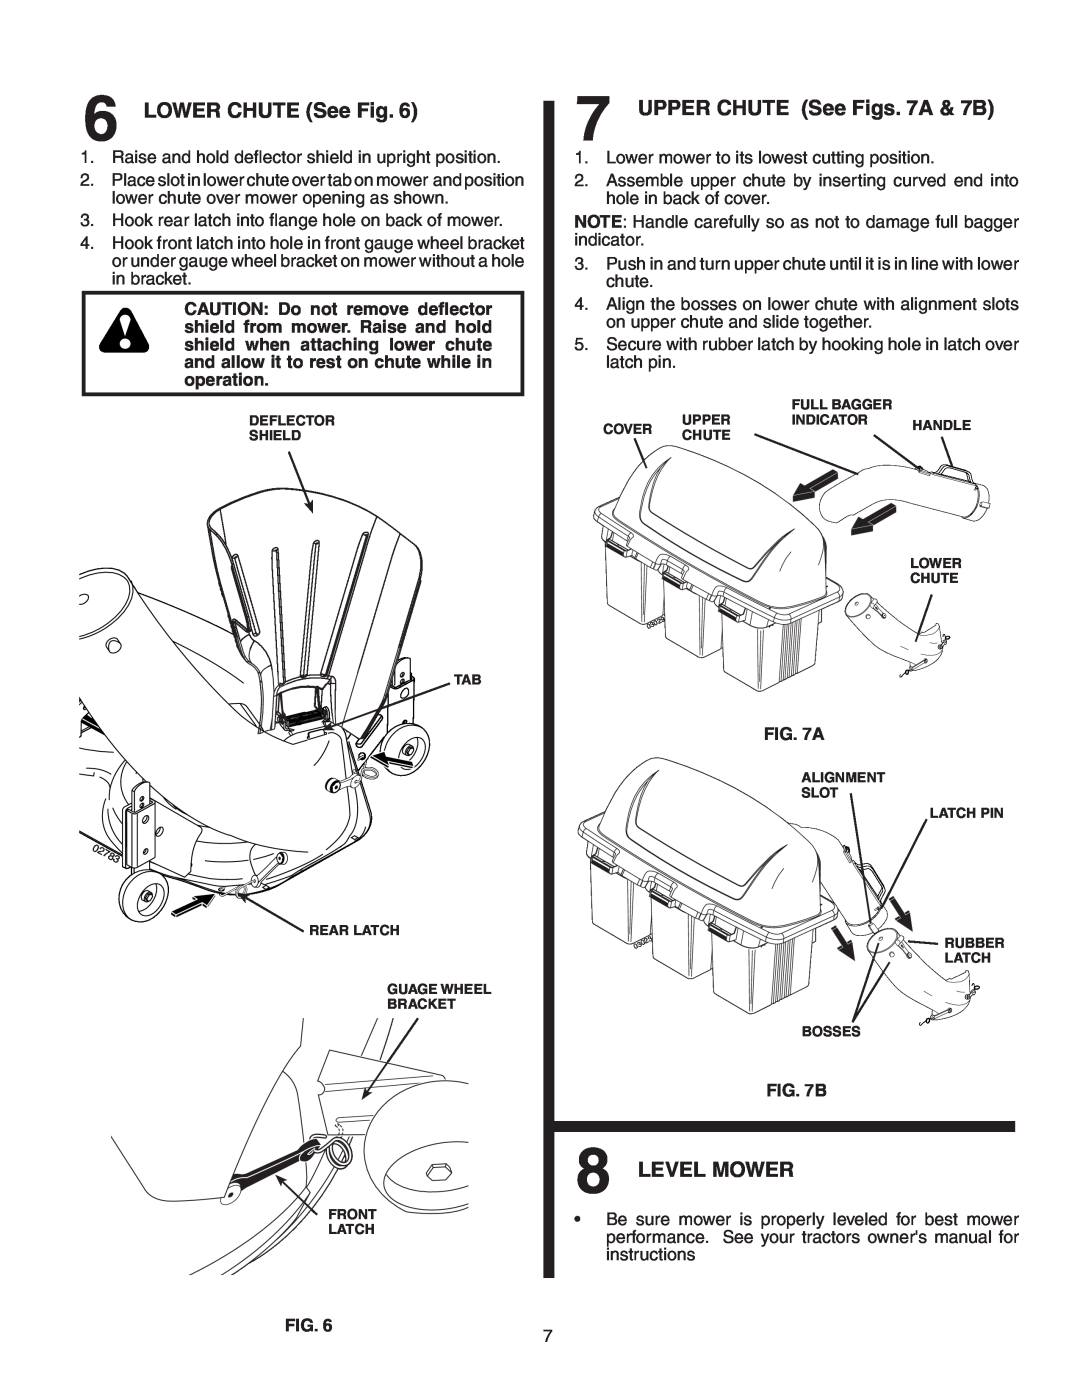 Poulan 96072001000, GTT354, 960 72 00-10 owner manual LOWER CHUTE See Fig, UPPER CHUTE See Figs. 7A & 7B, Level Mower 